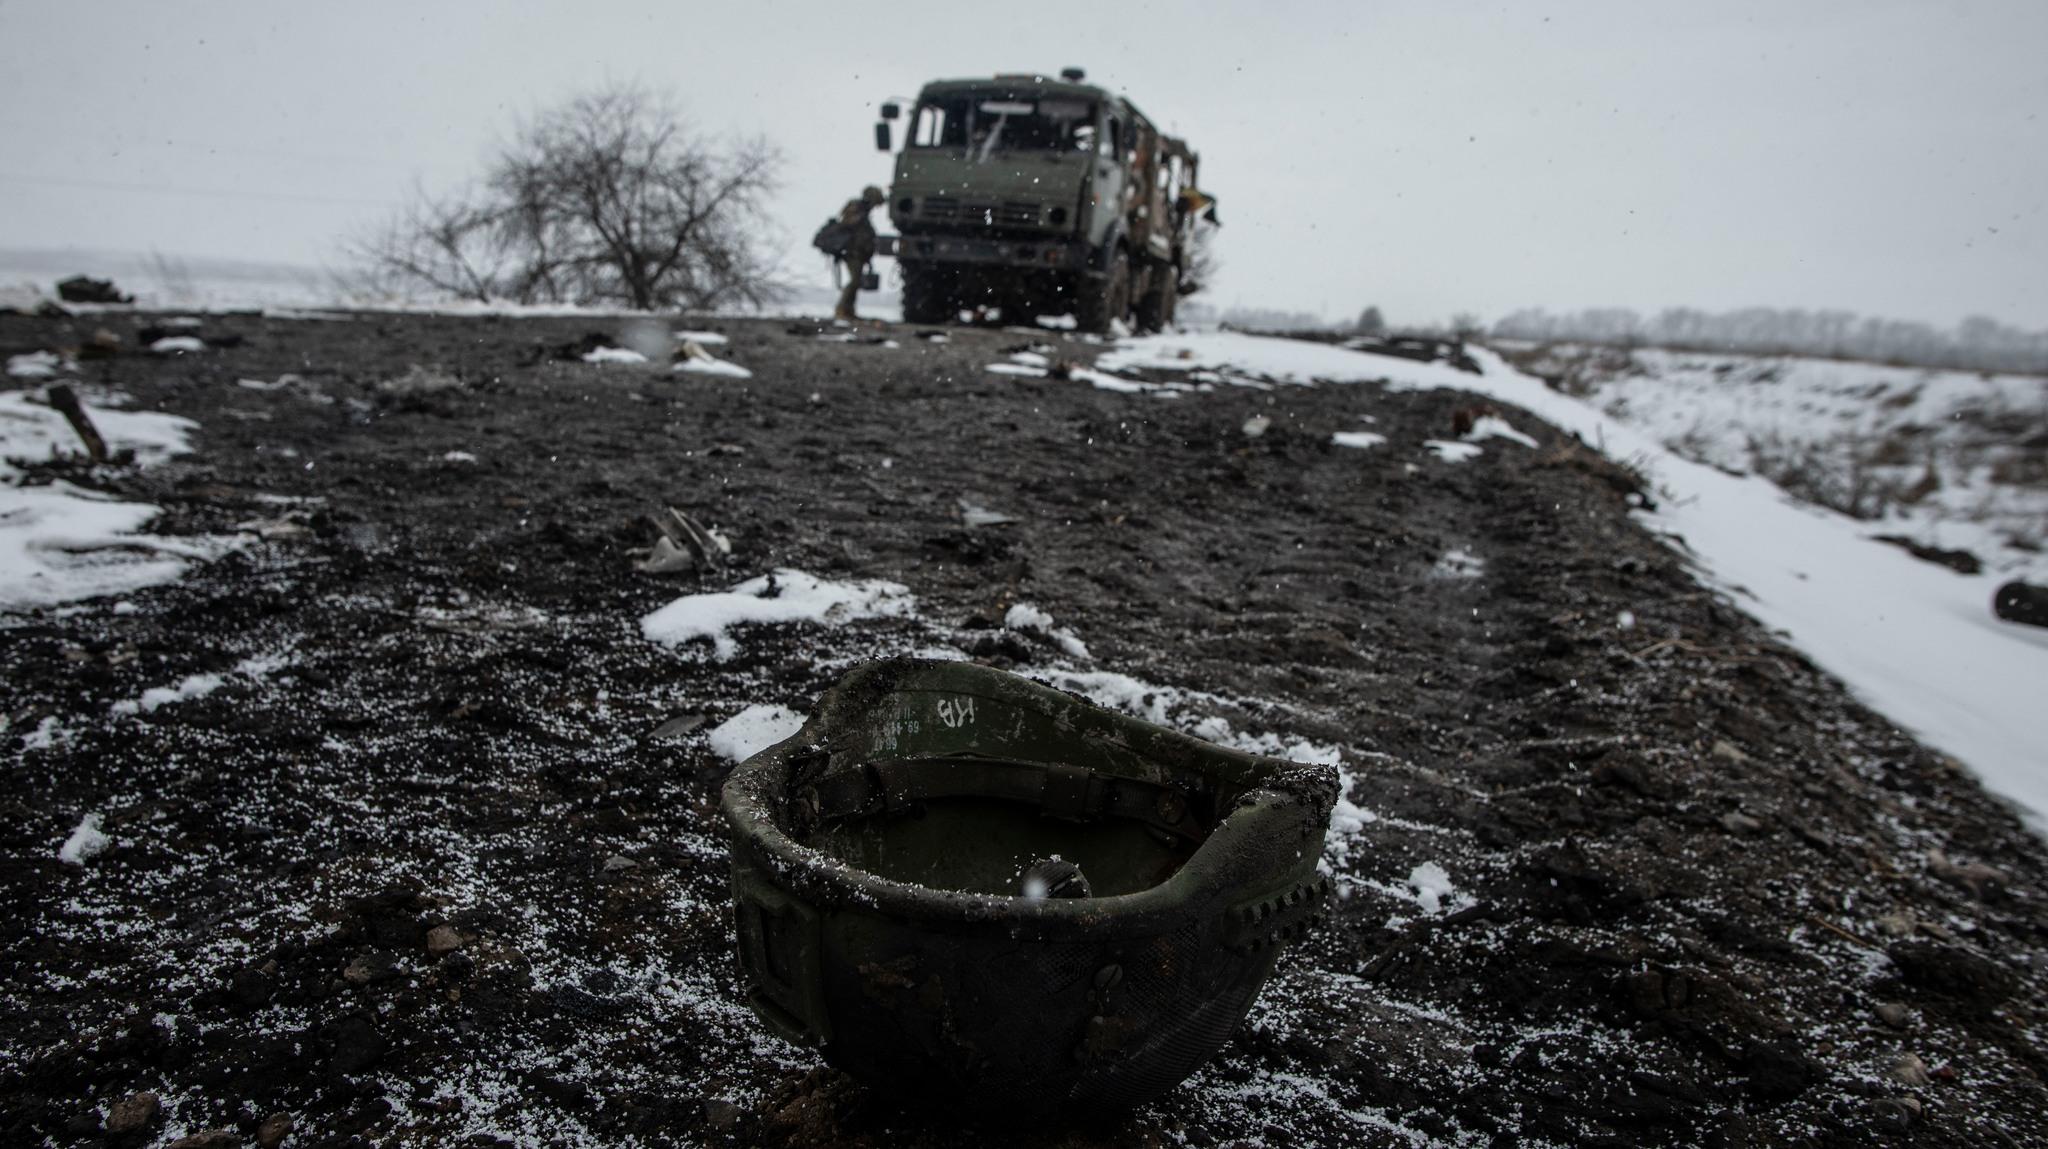 Defence Intelligence: Putin ordered troops to seize Donetsk and Luhansk regions by March